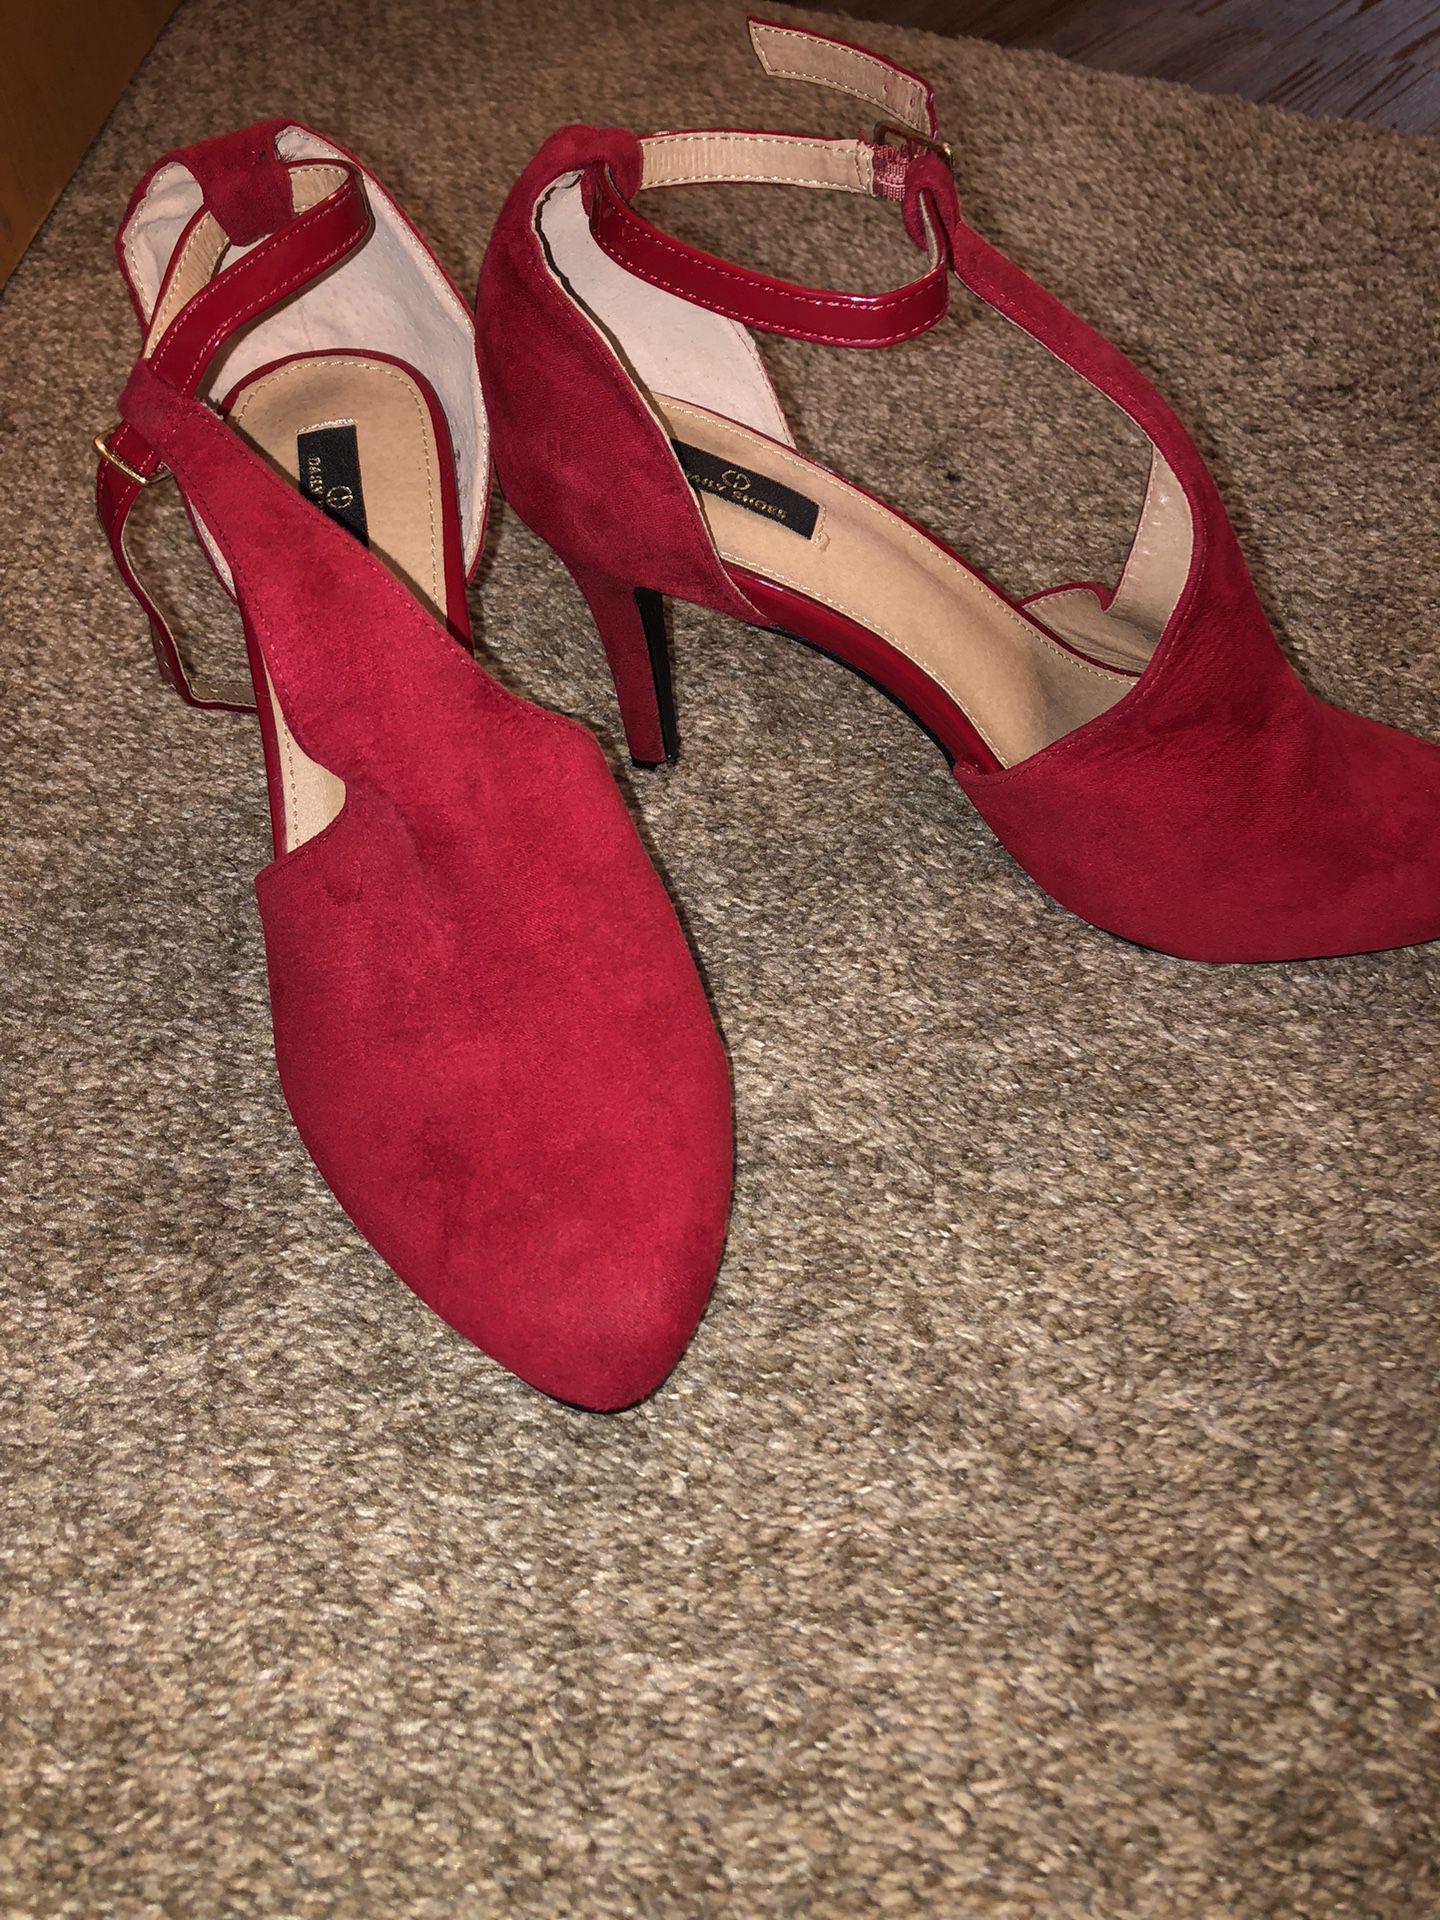 Red Daily Shoes